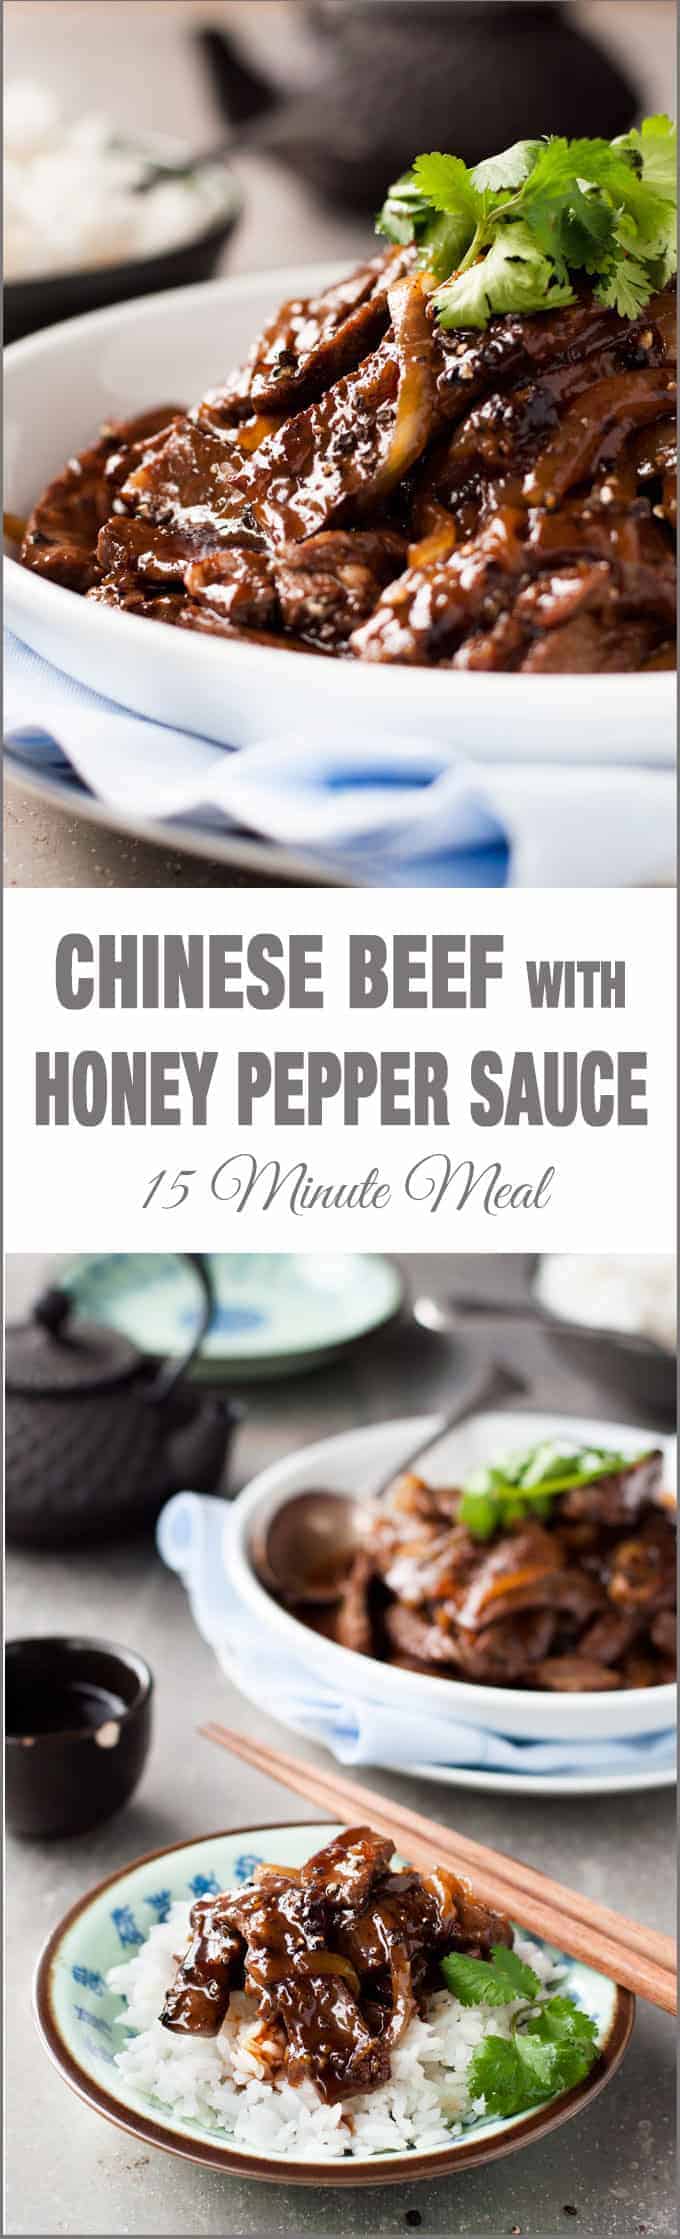 Chinese Beef with Honey & Black Pepper Sauce - A restaurant favourite at home in 15 minutes! Tender strips of beef stir fried with a lip smacking black pepper and honey sauce..